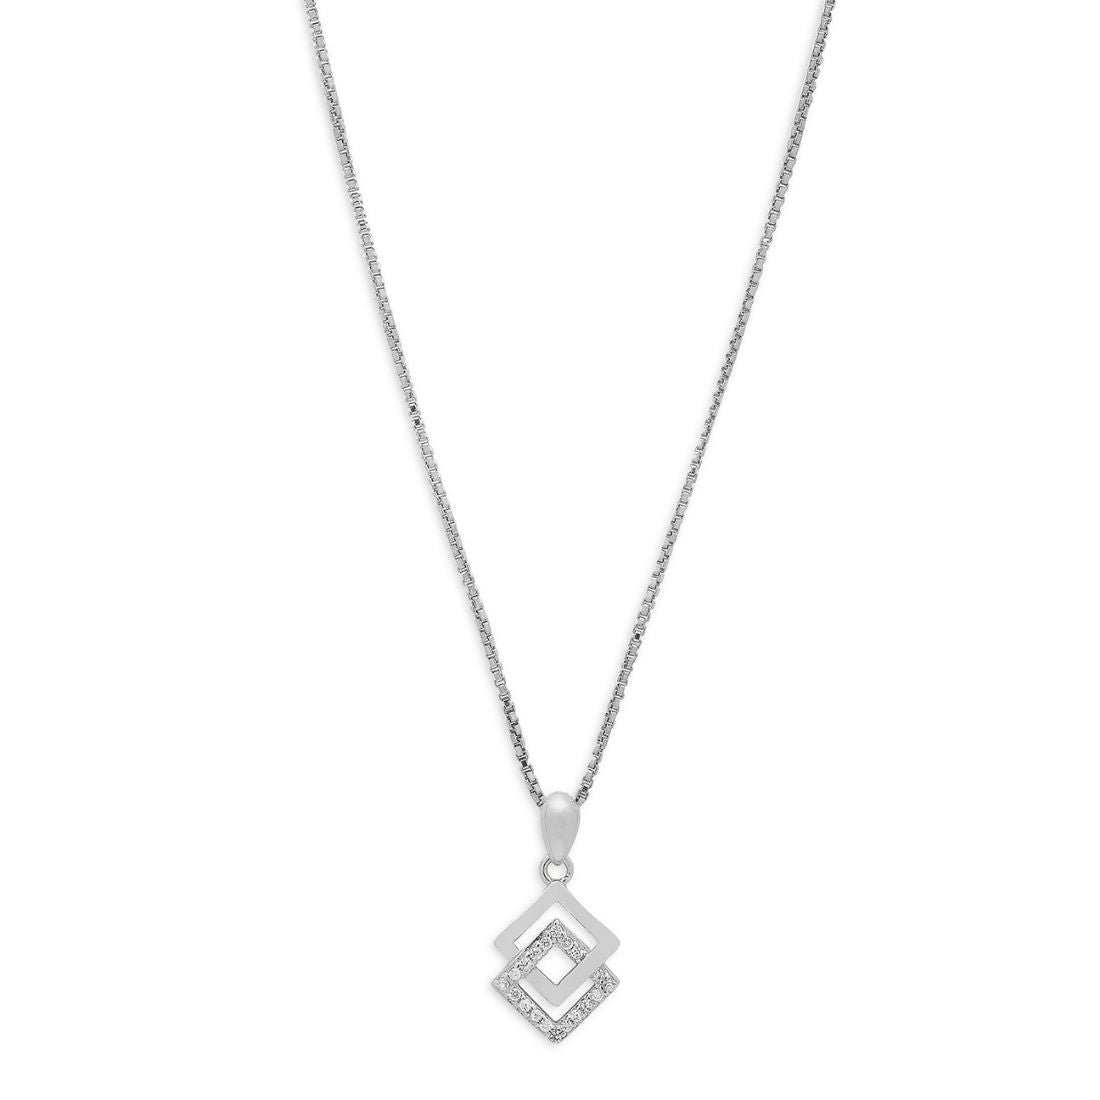 CZ Rhodium Plated Eternal Sparkle 925 Sterling Silver Pendant with Chain